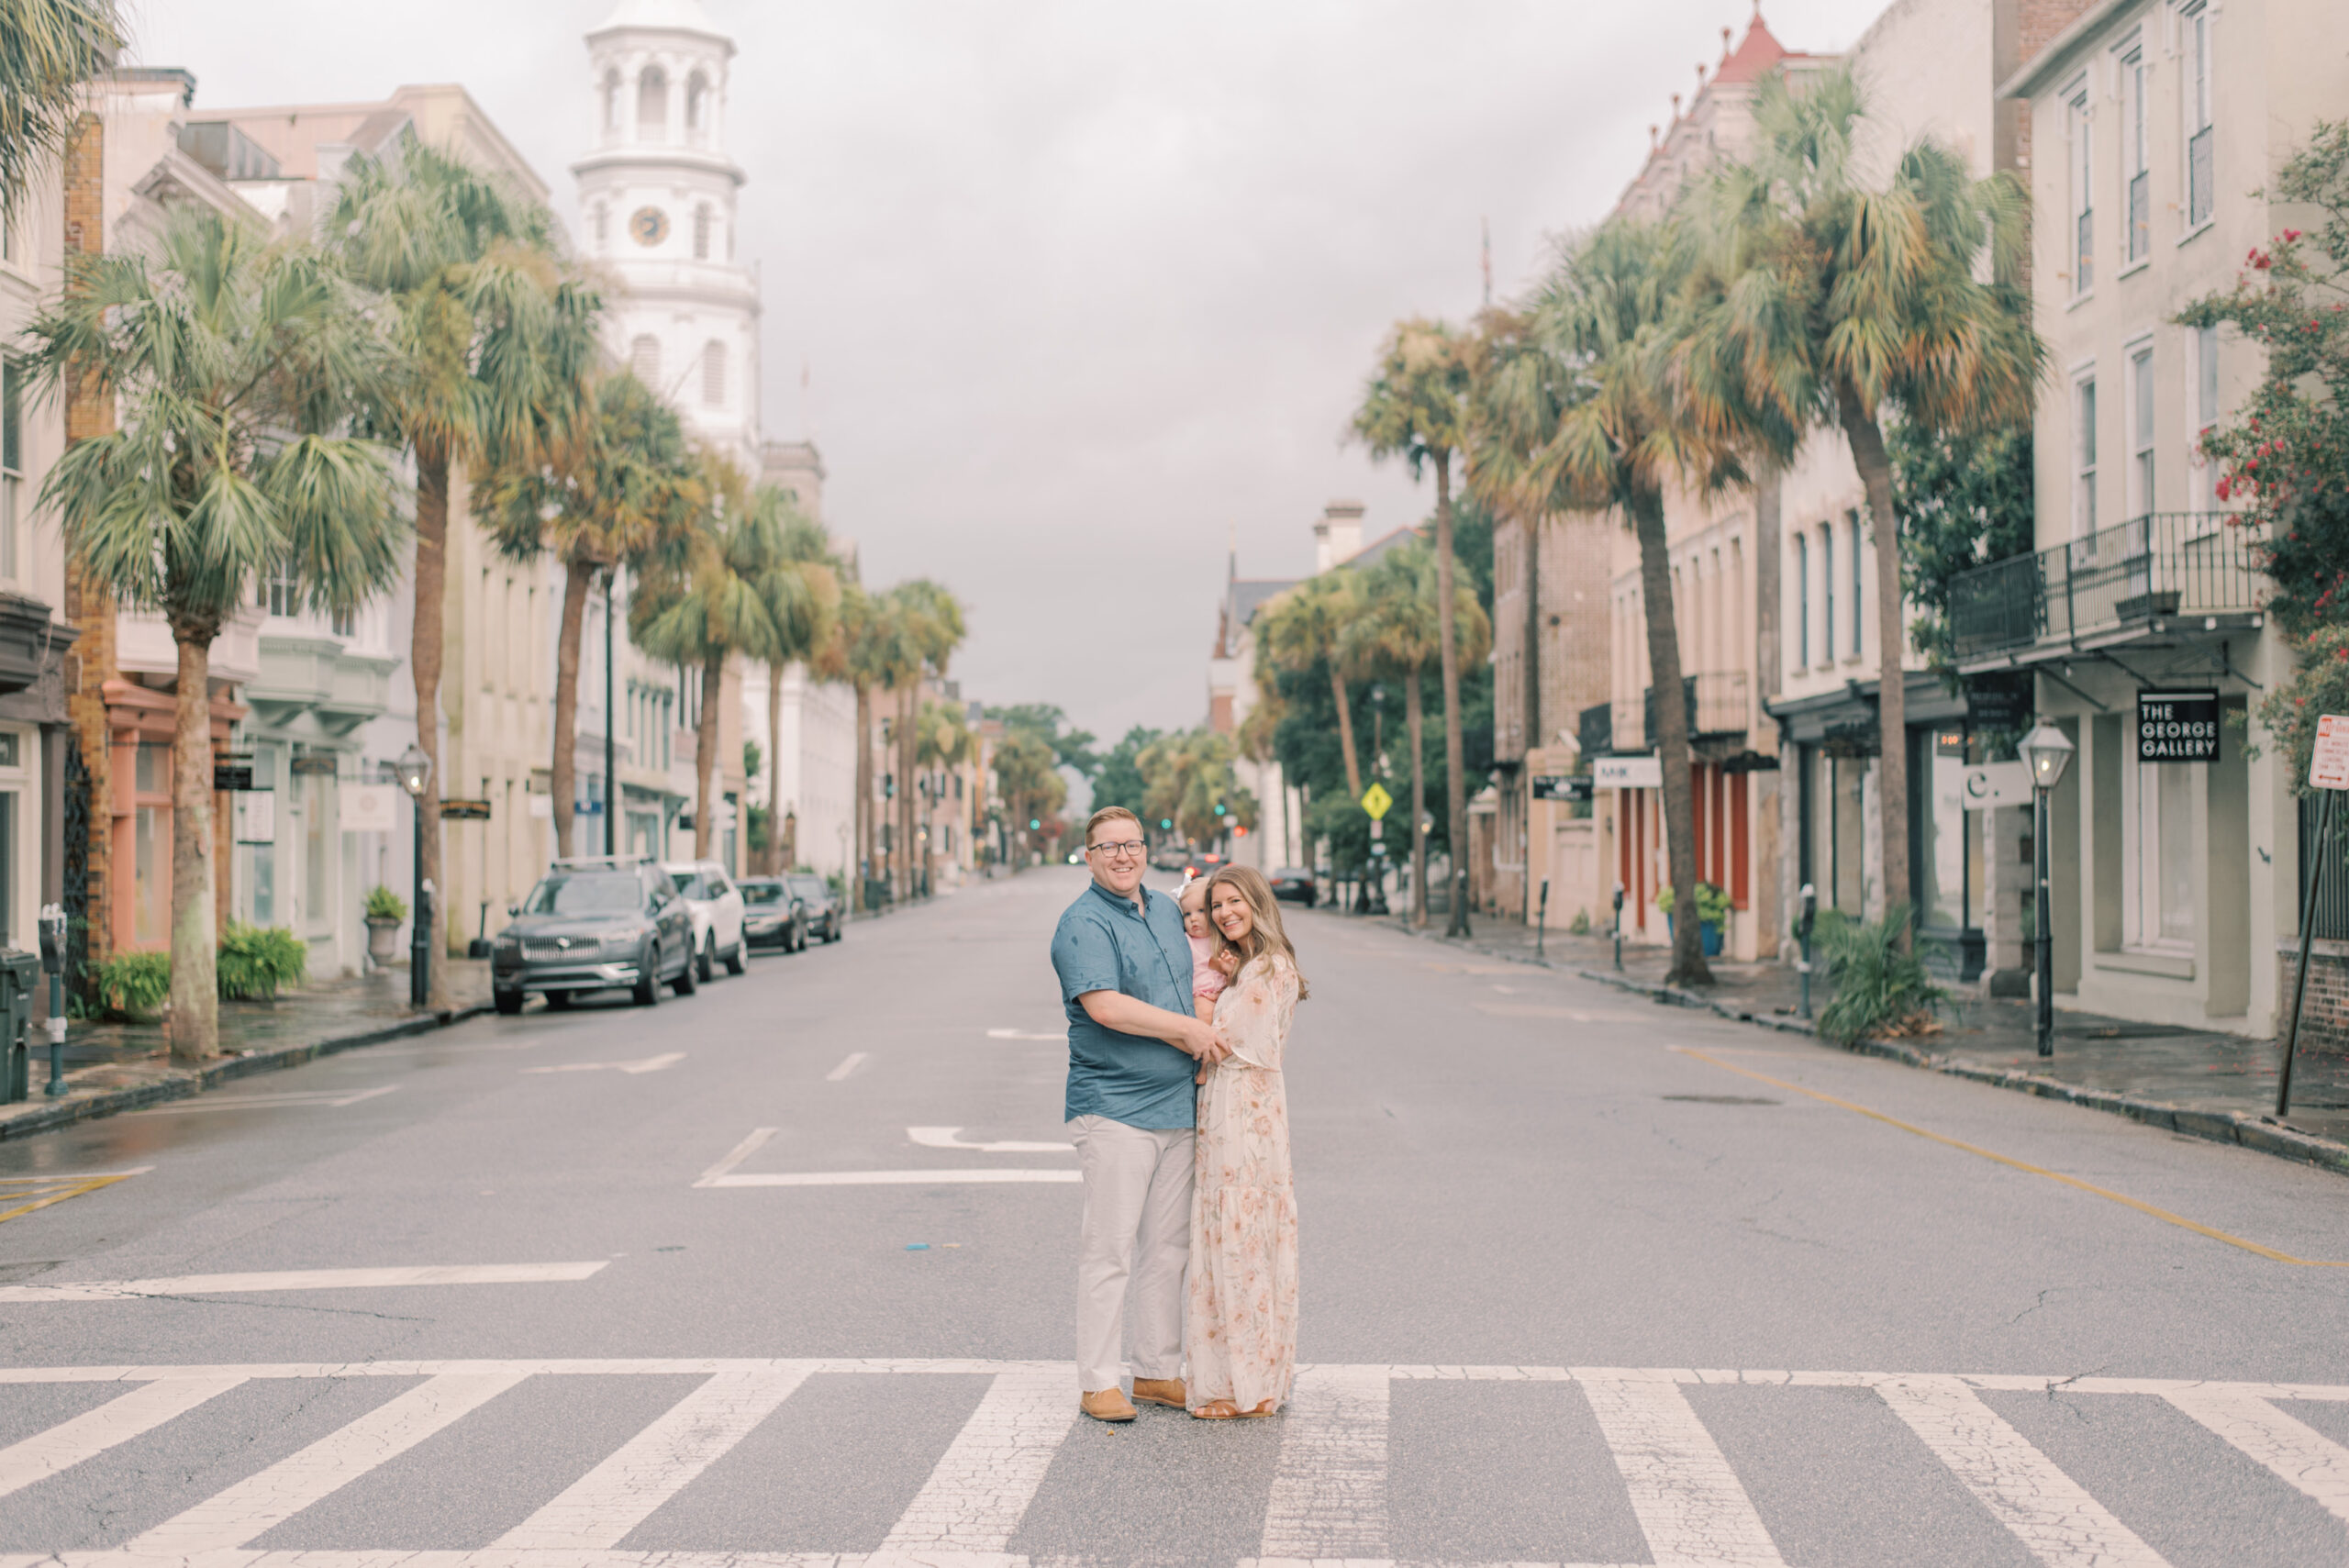 Family of three standing in the middle of Broad St. in Charleston with palm trees and colorful buildings